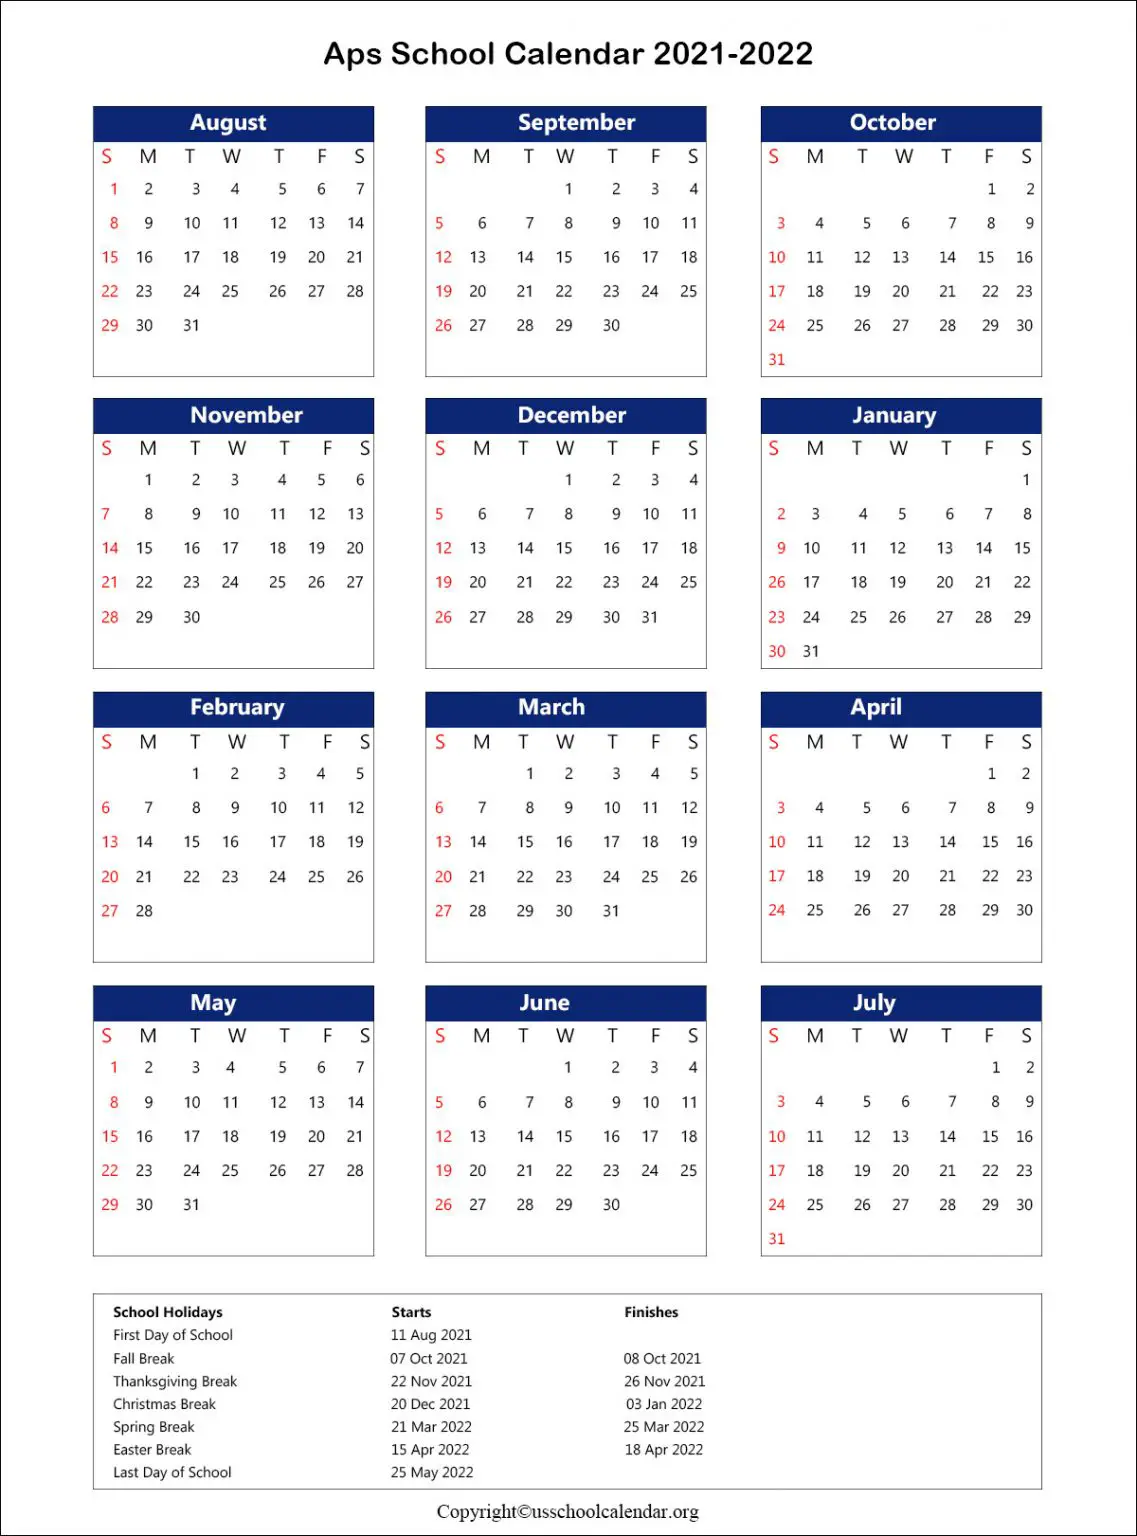 APS School Calendar with Holidays for 2021 2022